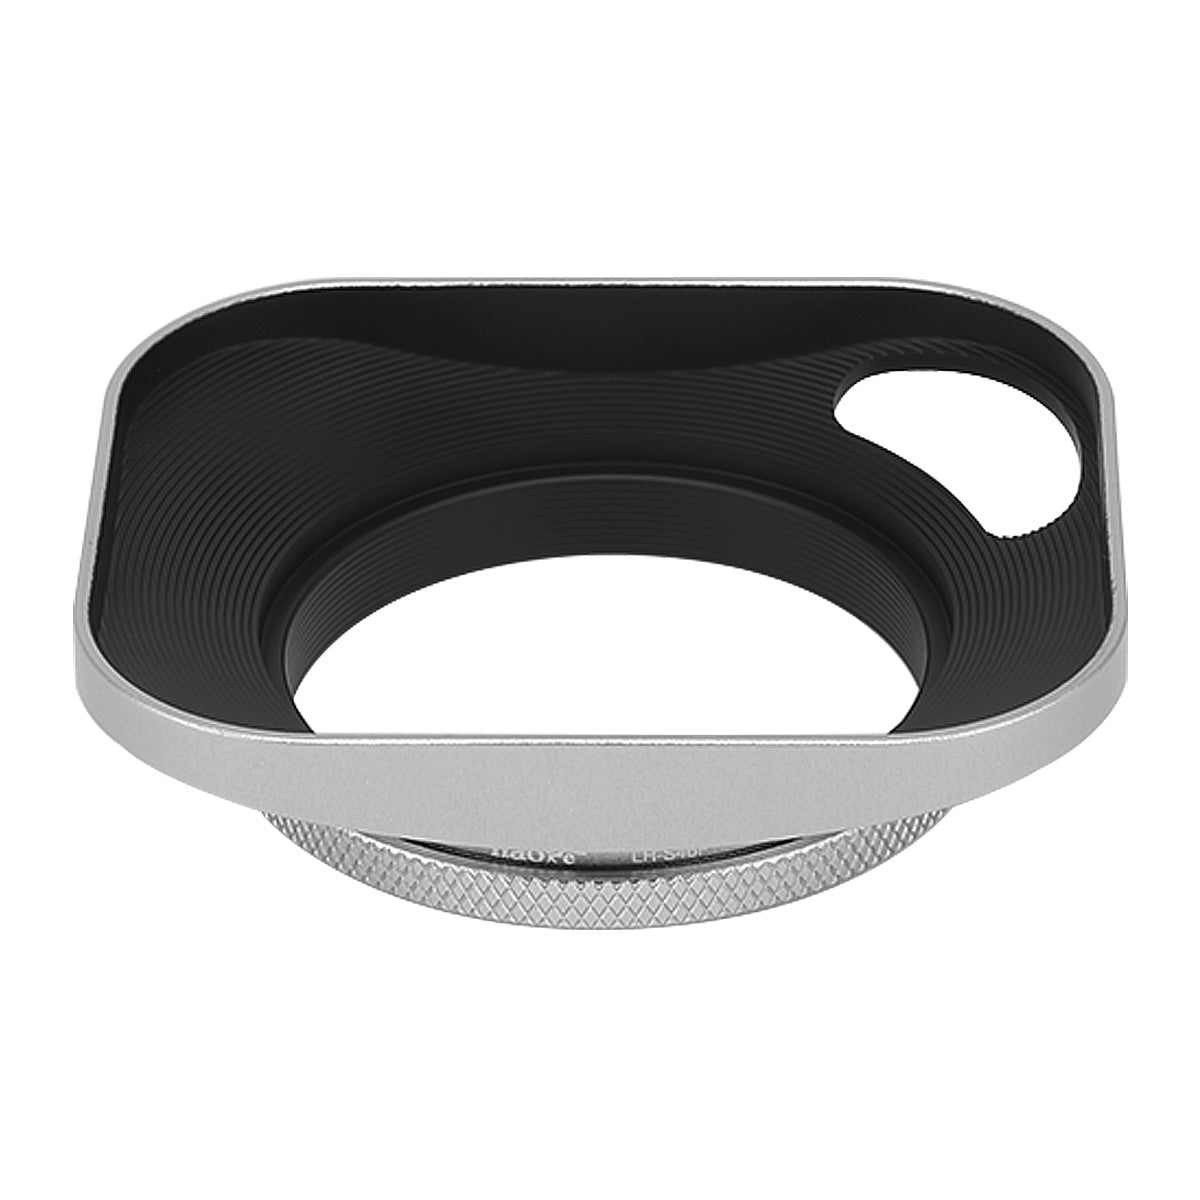 Haoge LH-S46P 46mm Square Metal Screw-in Lens Hood Hollow Out Designed with Cap for Leica Rangefinder Camera with 46mm E46 Filter Thread Lens Silver